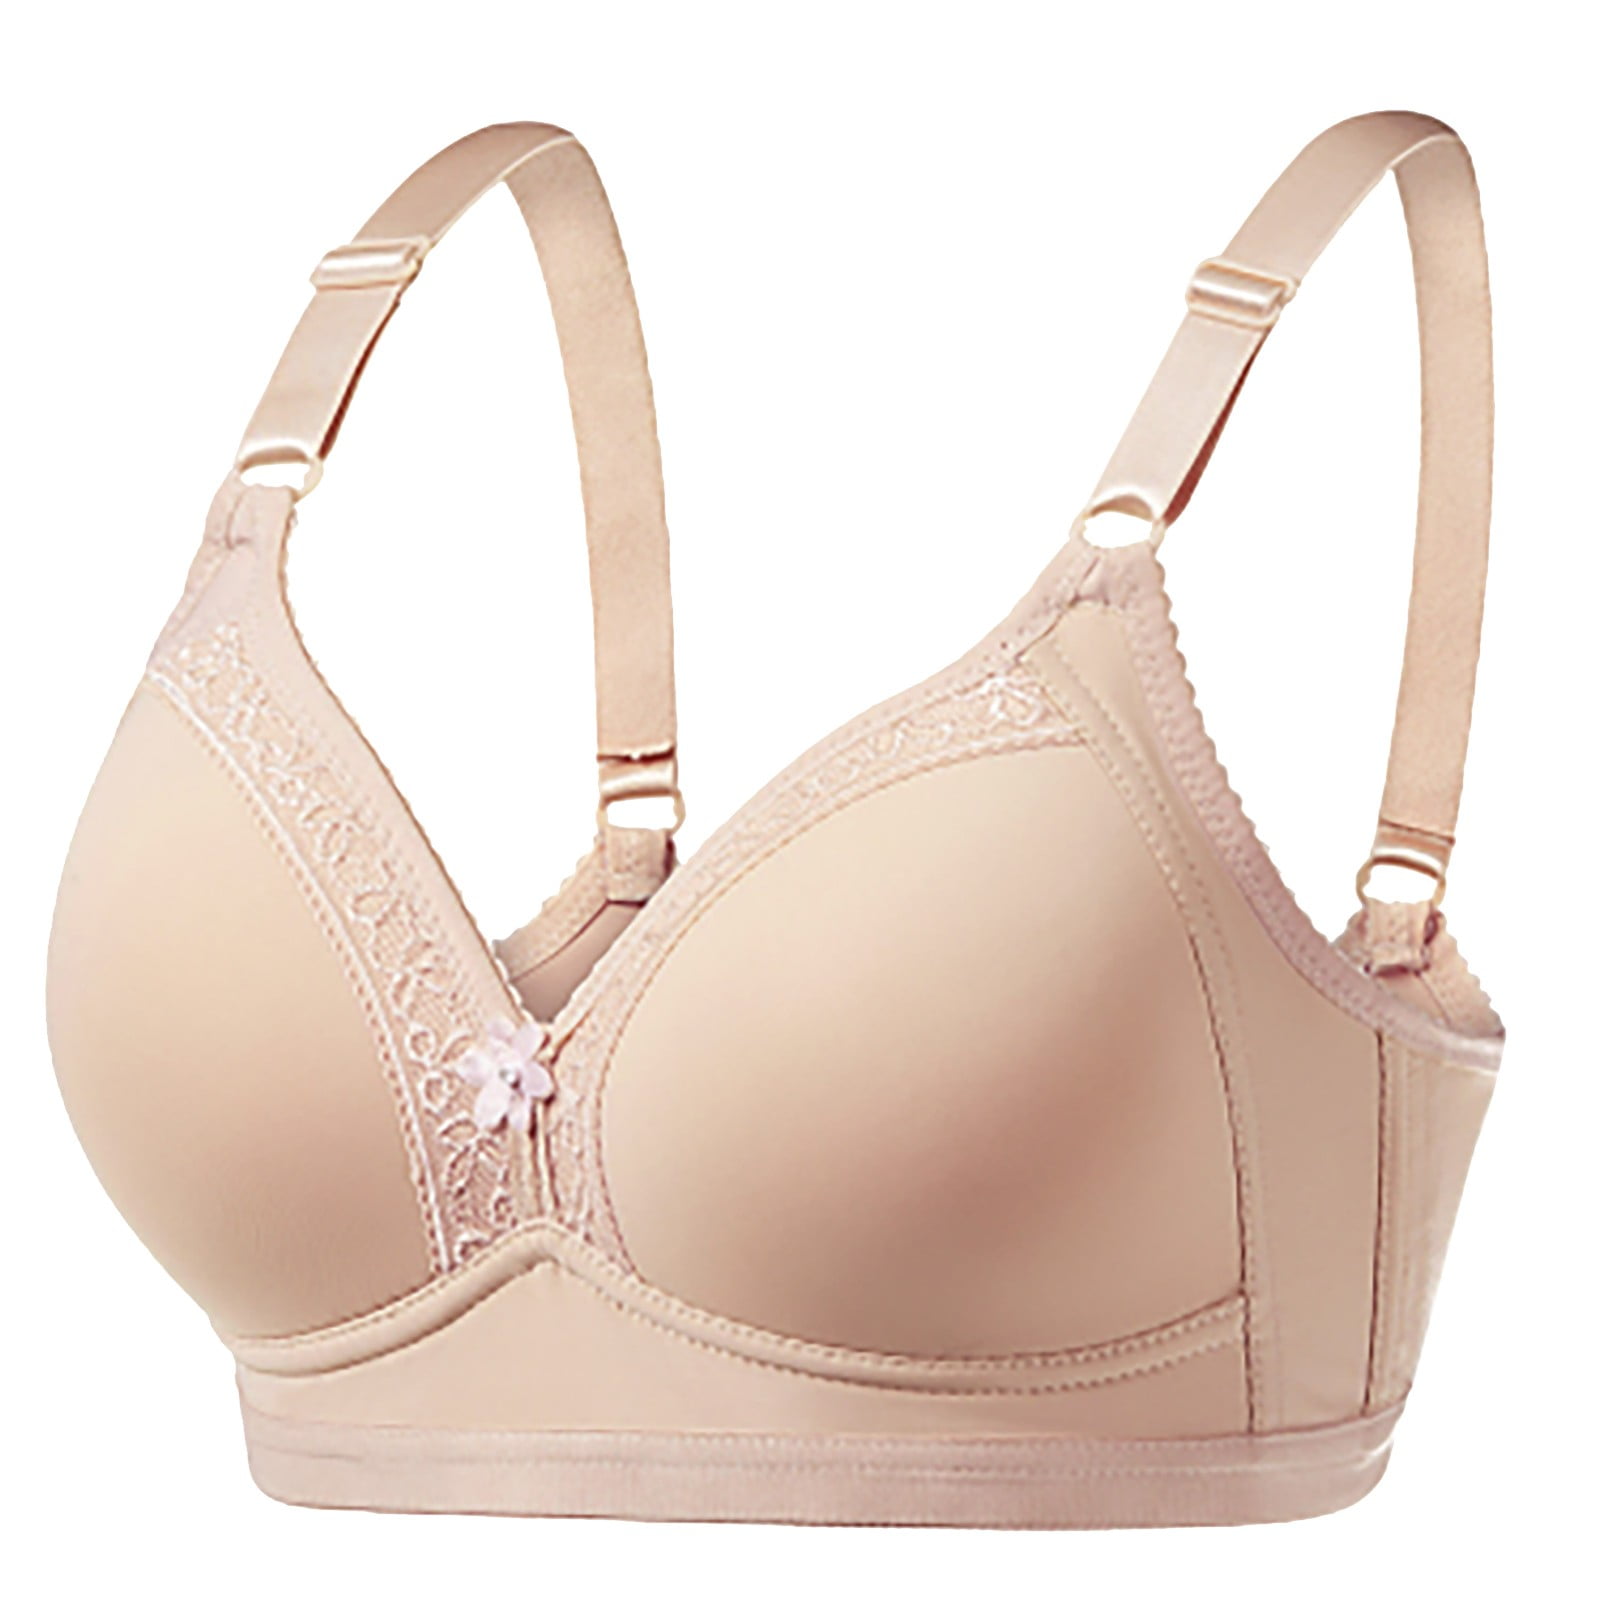 JGTDBPO Summer Savings Clearance Wireless Support Bras For Women Full  Coverage And Lift Plus Size Bras Post-Surgery Bra Wirefree Bralette  Minimizer Bra For Everyday Comfort 